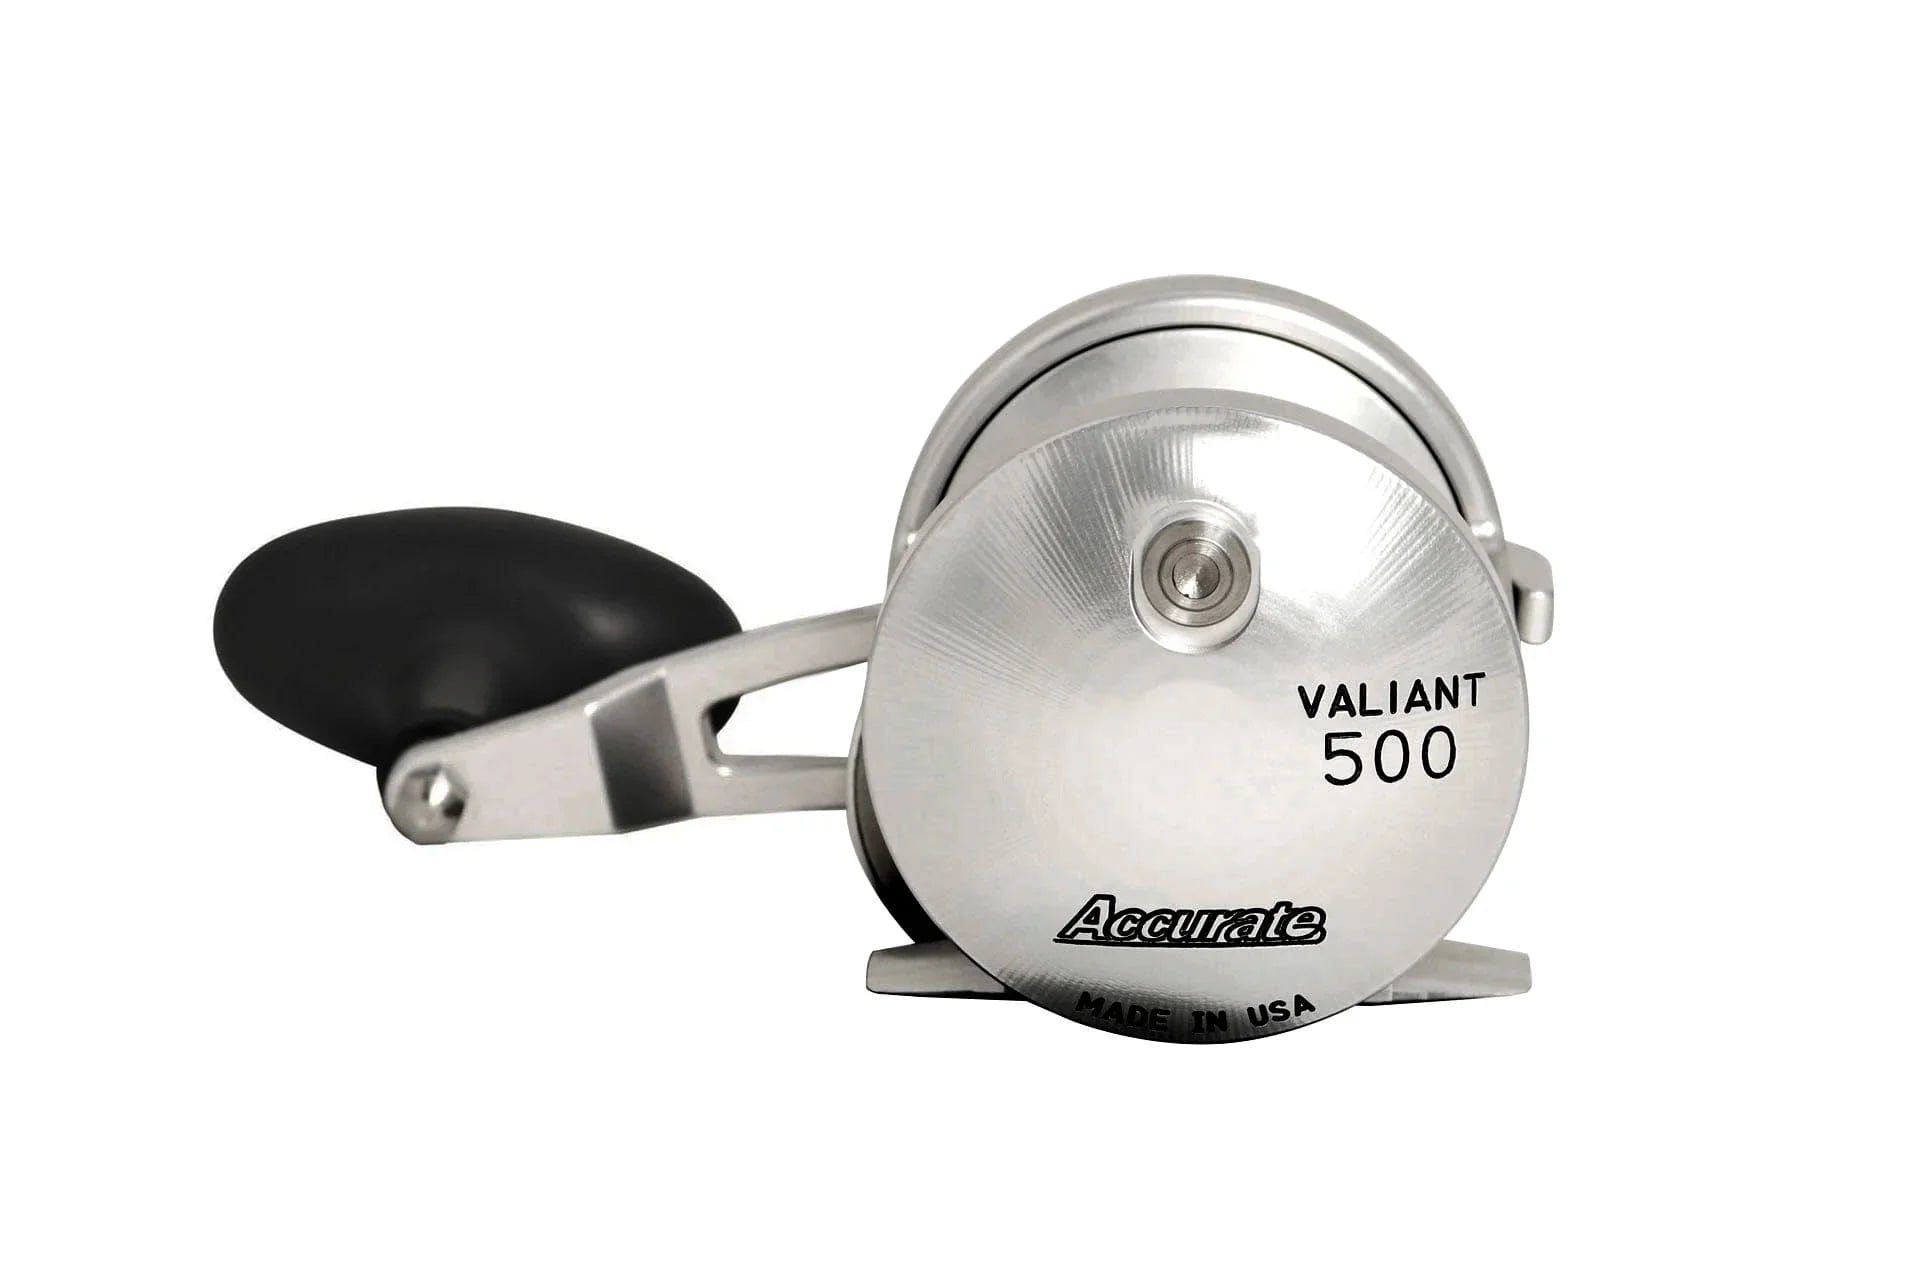 Accurate Valiant Conventional Reel BV-400-S